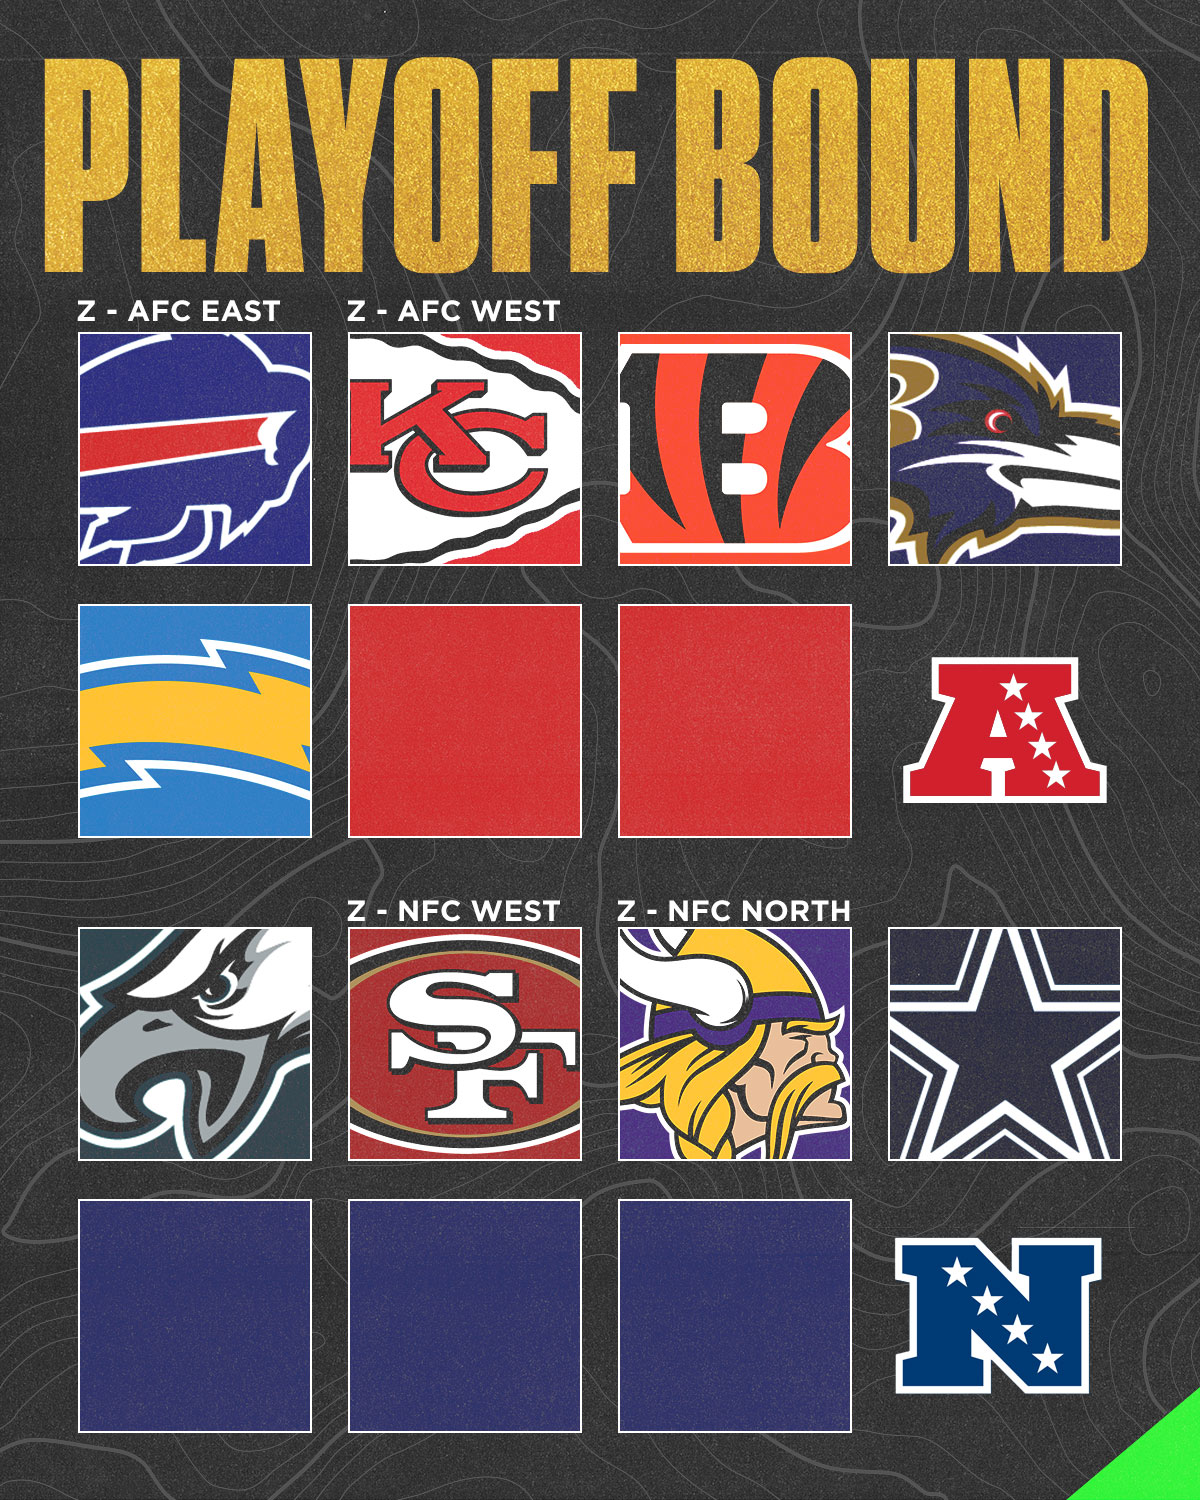 Sunday Night Football on NBC on X: 'Just TWO spots remain open in the AFC  Playoffs. Who's next?! 